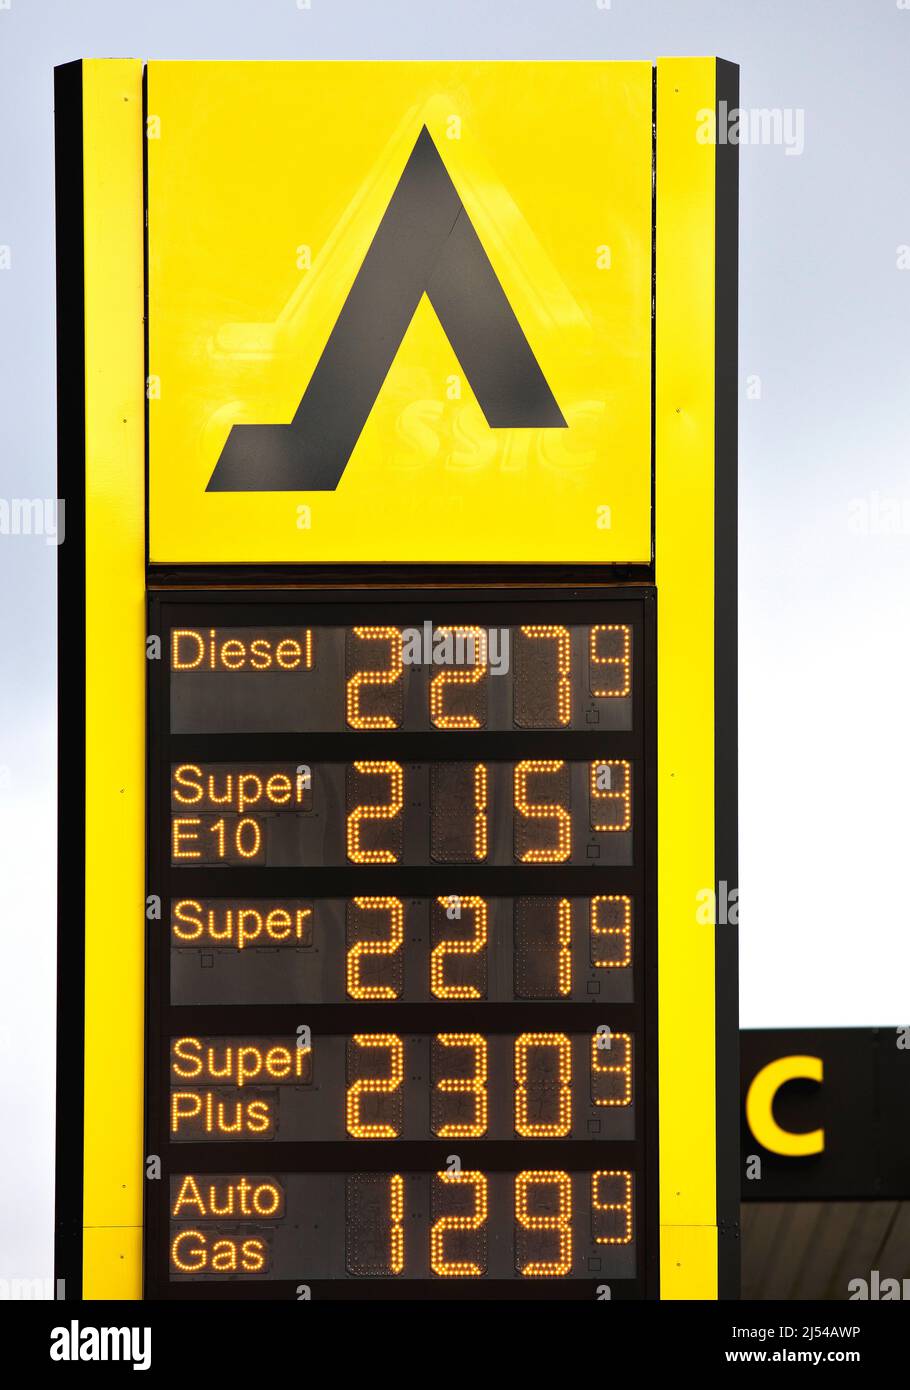 scoreboard at a gas stallion, fuel at high price, Germany Stock Photo